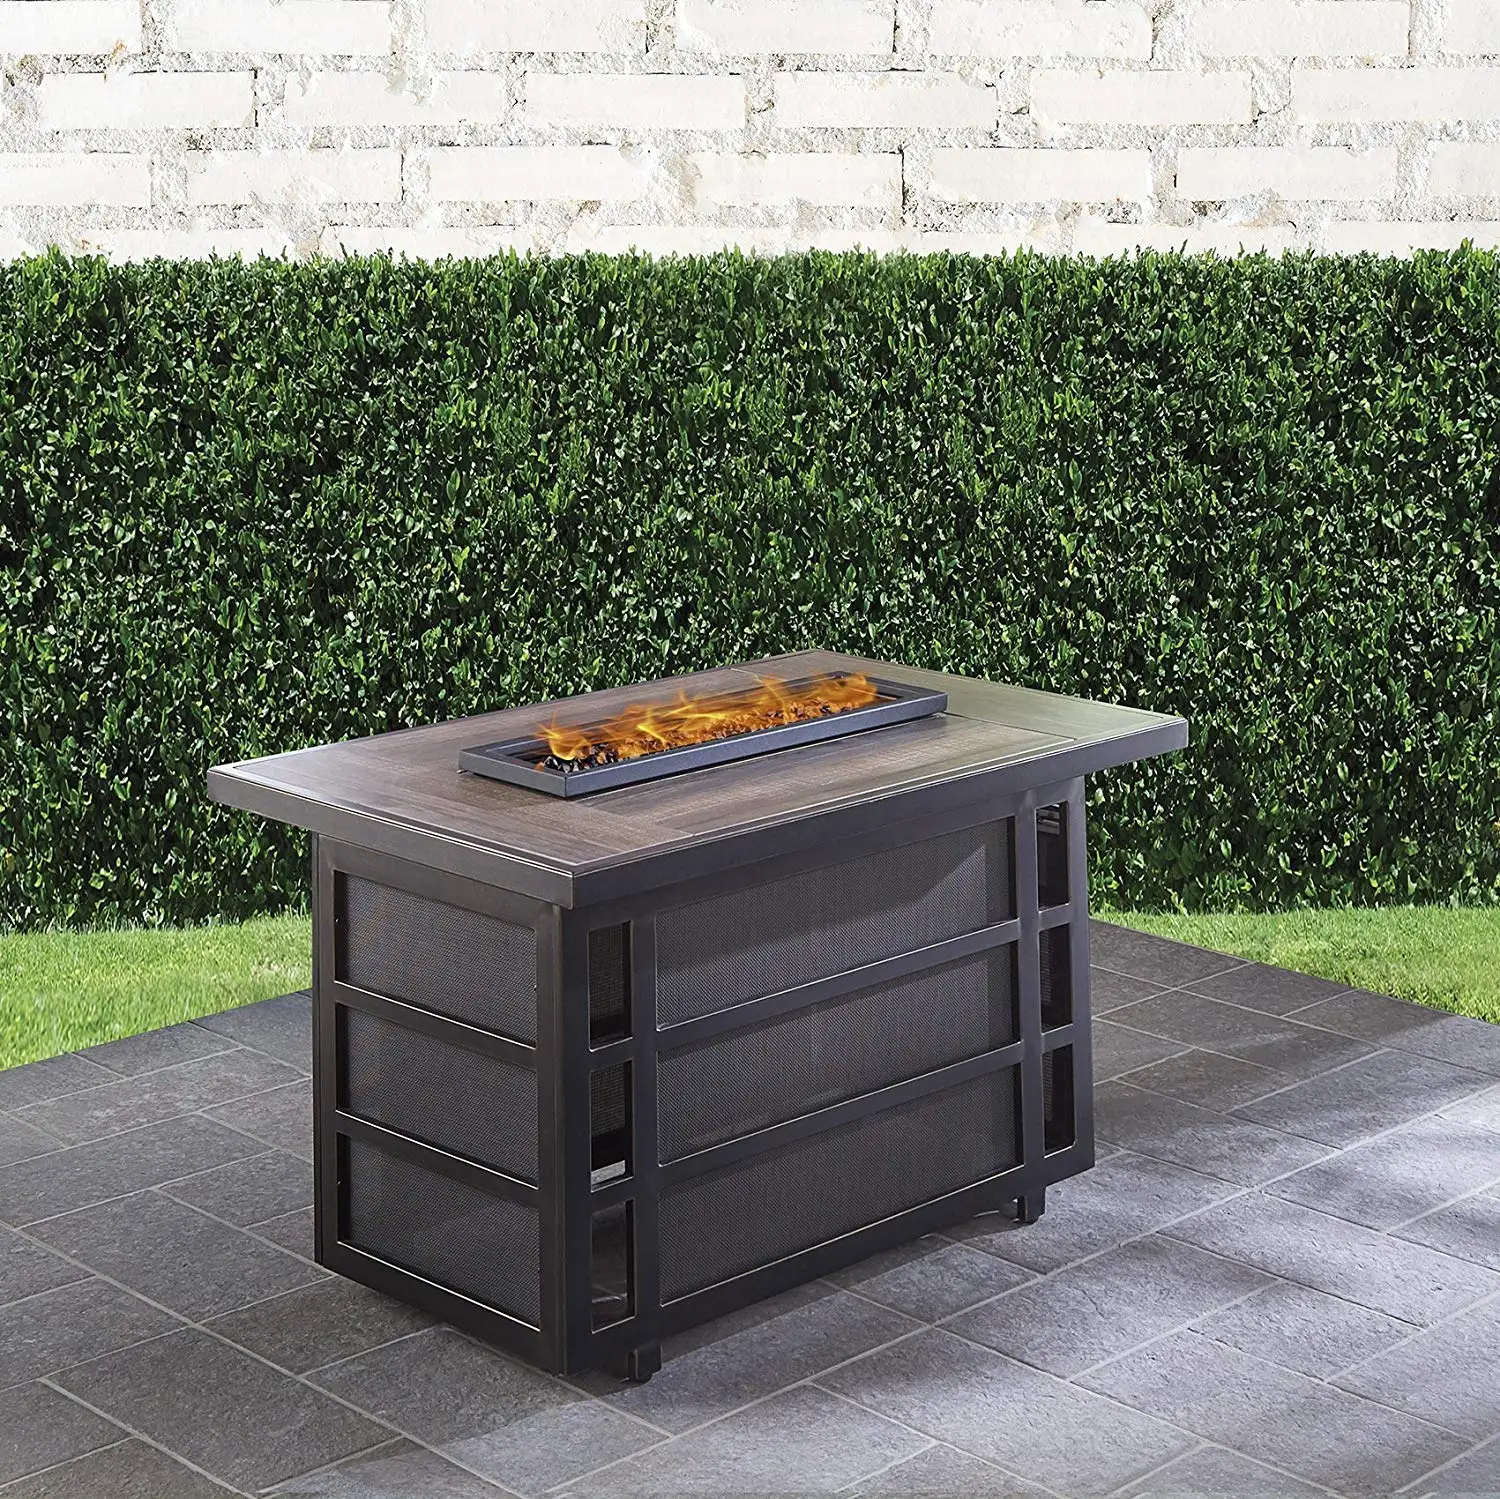 Cheap Outdoor Coffee Table Gas Fire Pit, find Outdoor ...